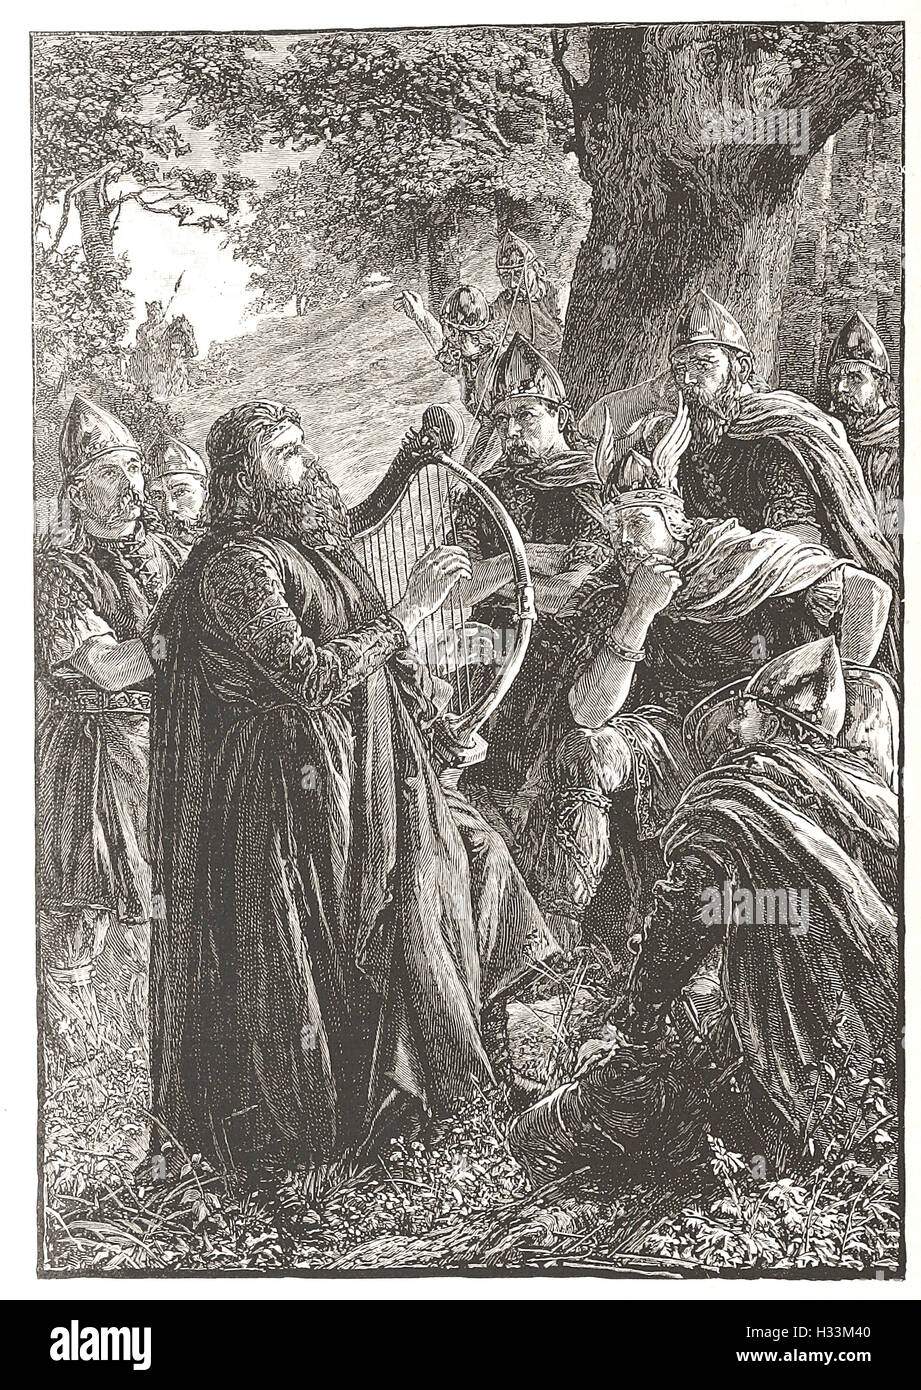 ALFRED THE GREAT, DISGUISED AS A HARPER, PRAYING BEFORE GUTHRUM - from 'Cassell's Illustrated Universal History' - 1882 Stock Photo